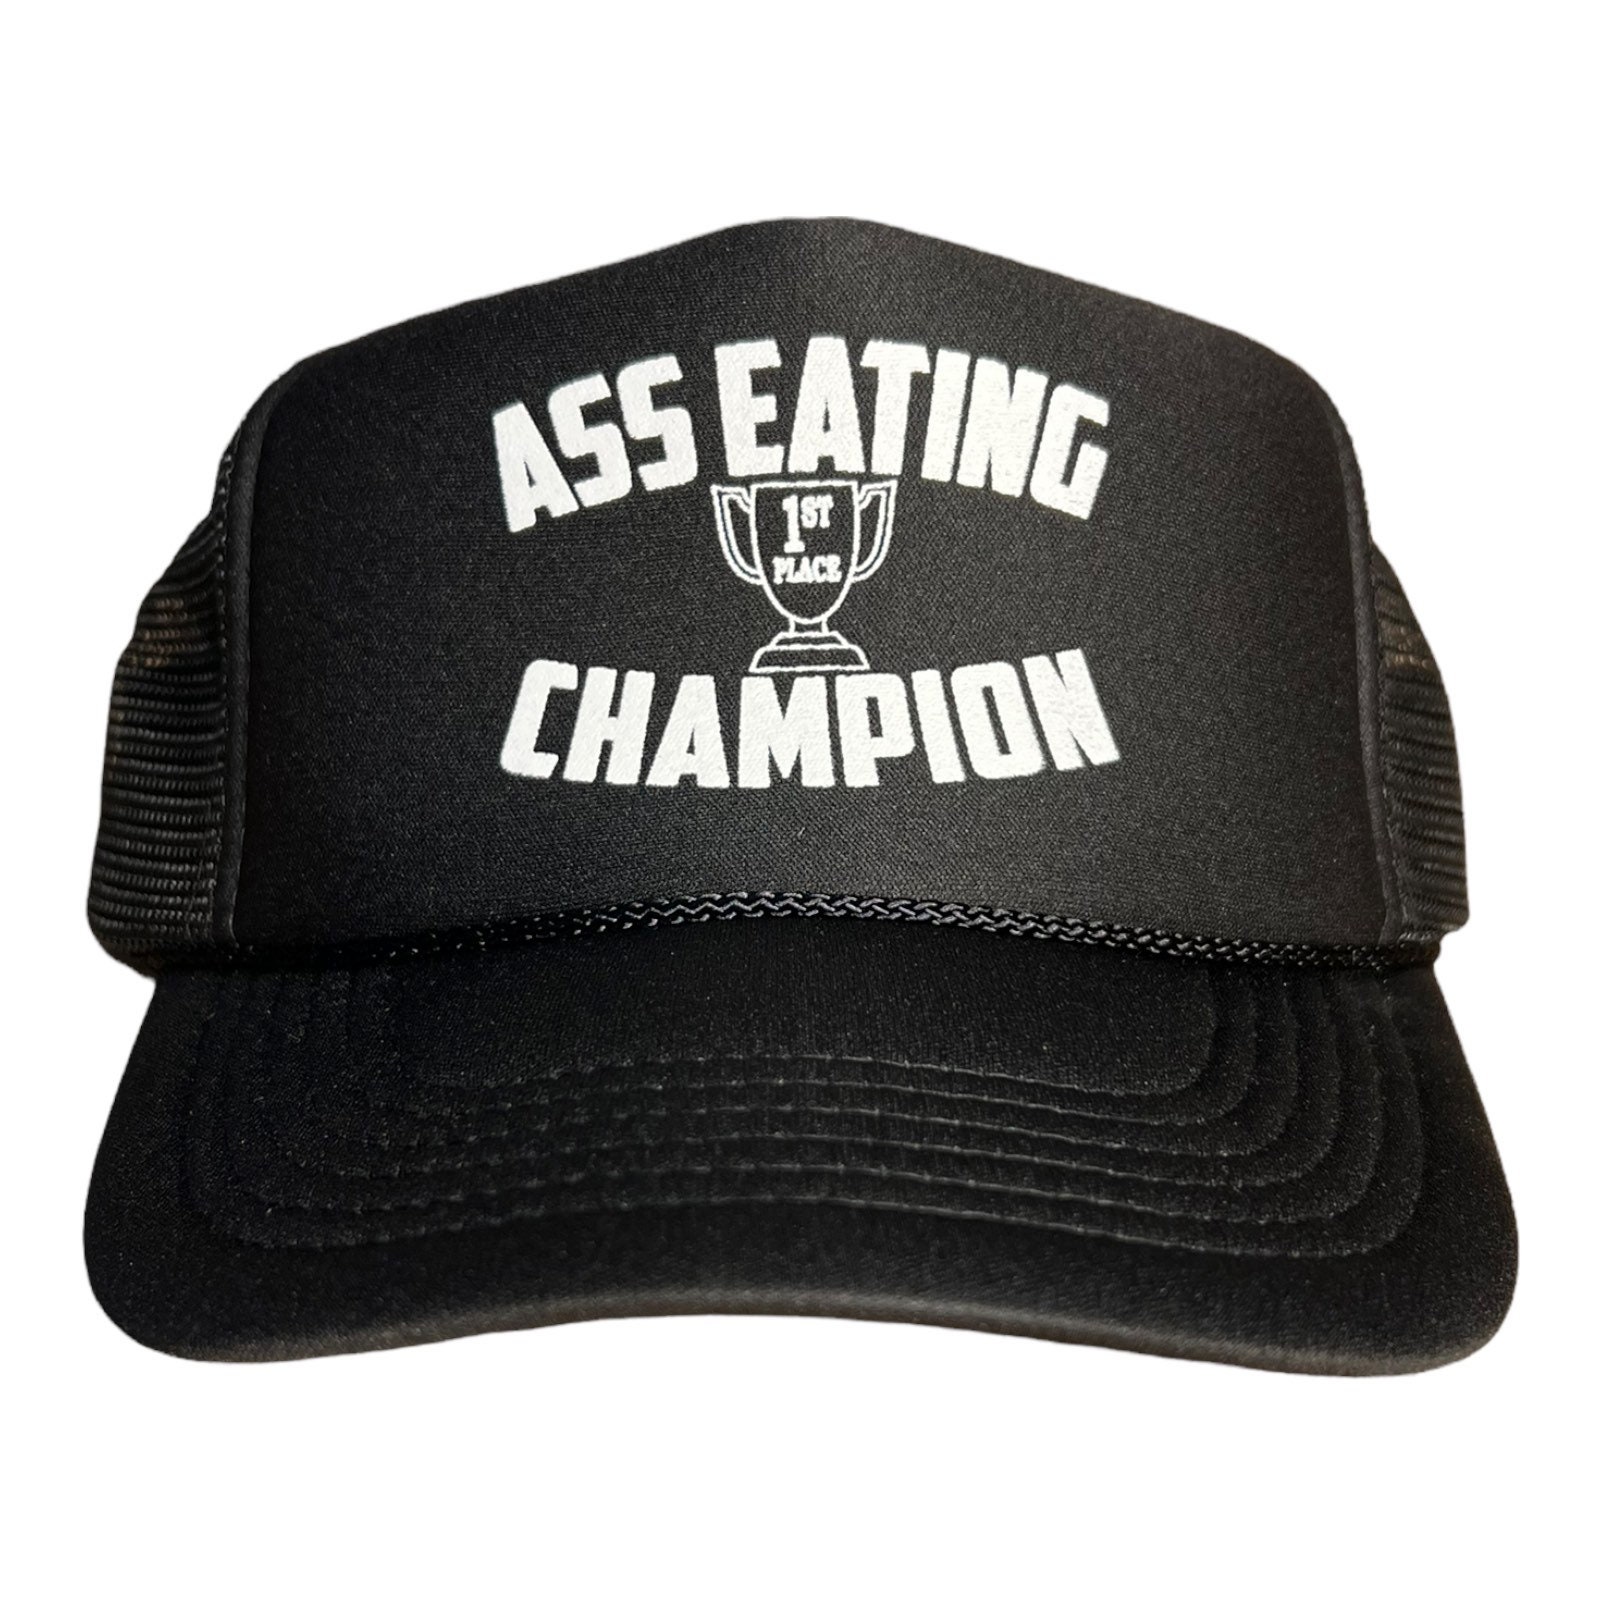 Ass Eating Champion Hat // Funny Trucker Hat // Adult Mens pic